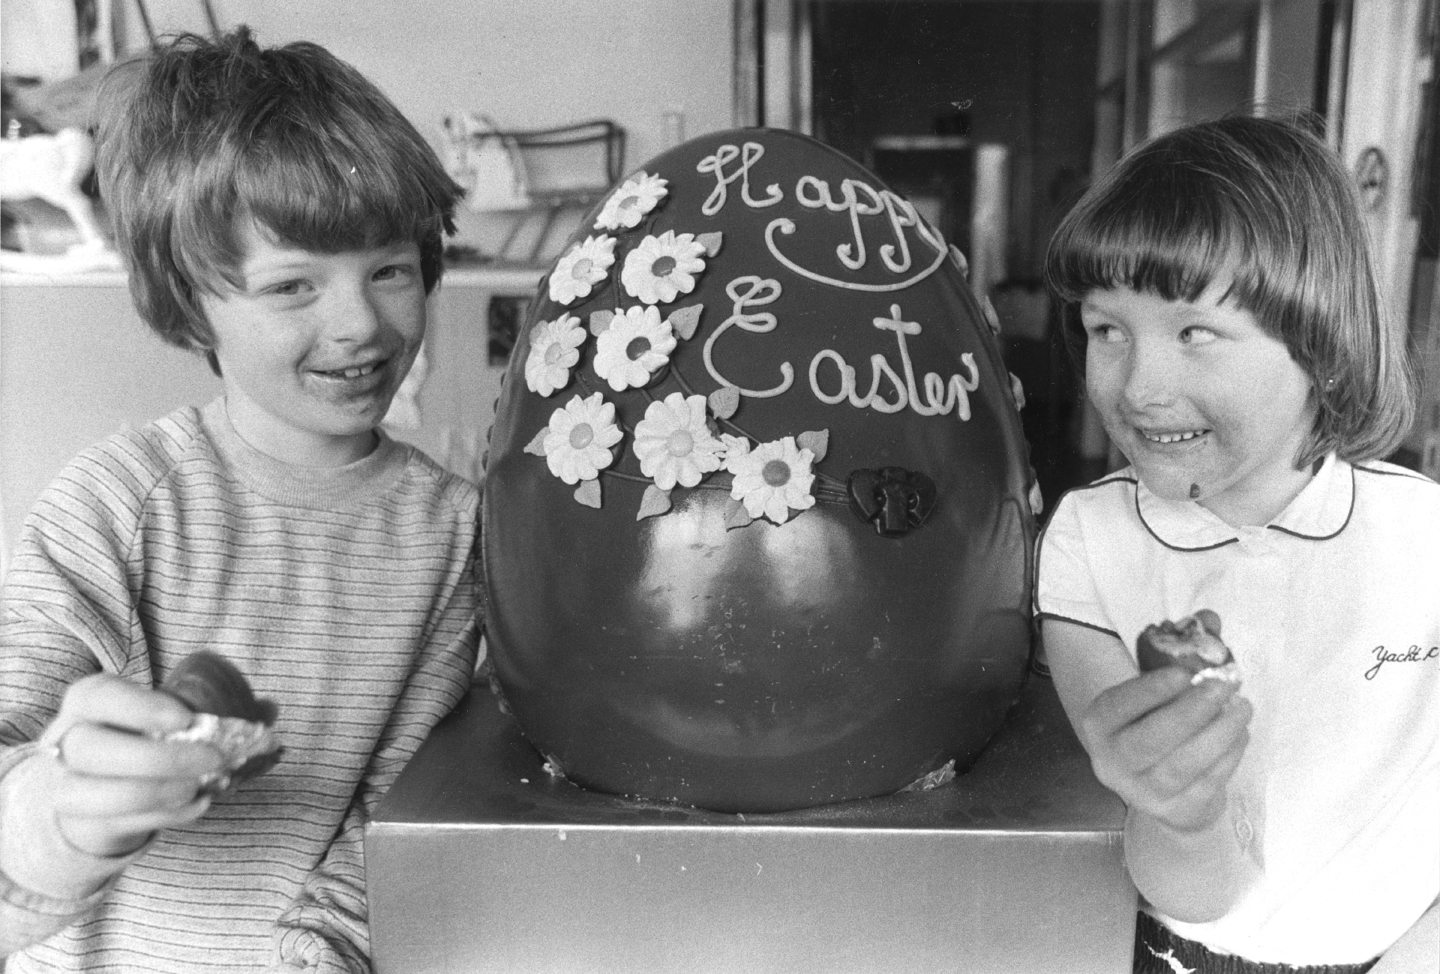 Paula Duguid from Elgin and Gillian Clark from Cove got a sugar high in this picture from 1983 while sizing up a giant Easter egg.